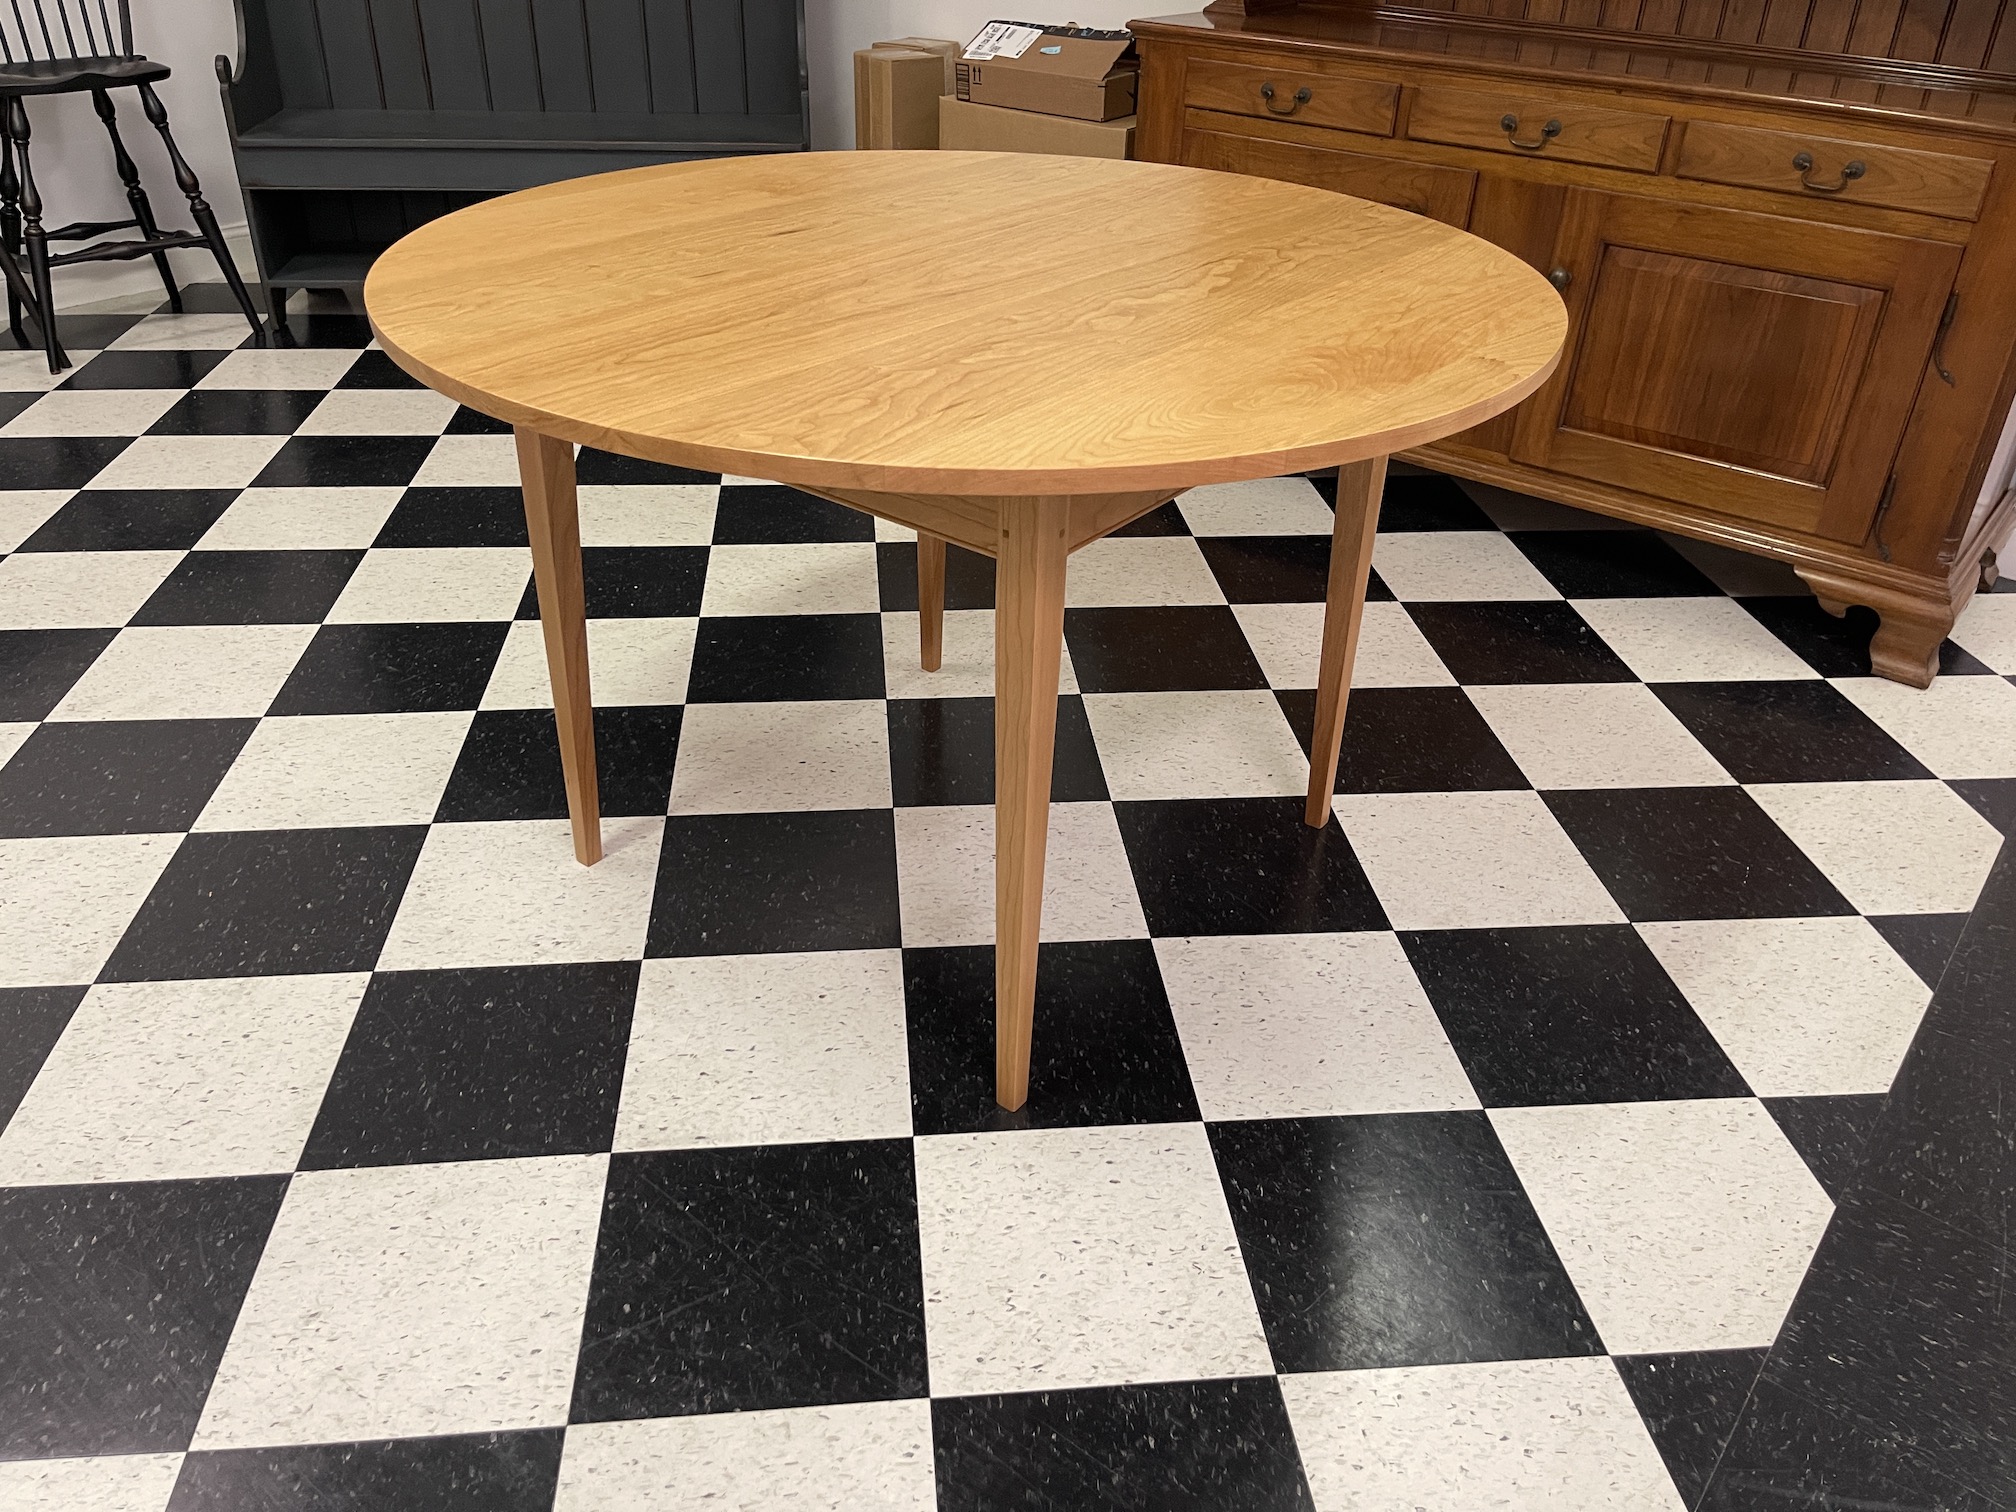 New Model 48in Round Shaker Table - Cherry Wood - Natural Finish Image